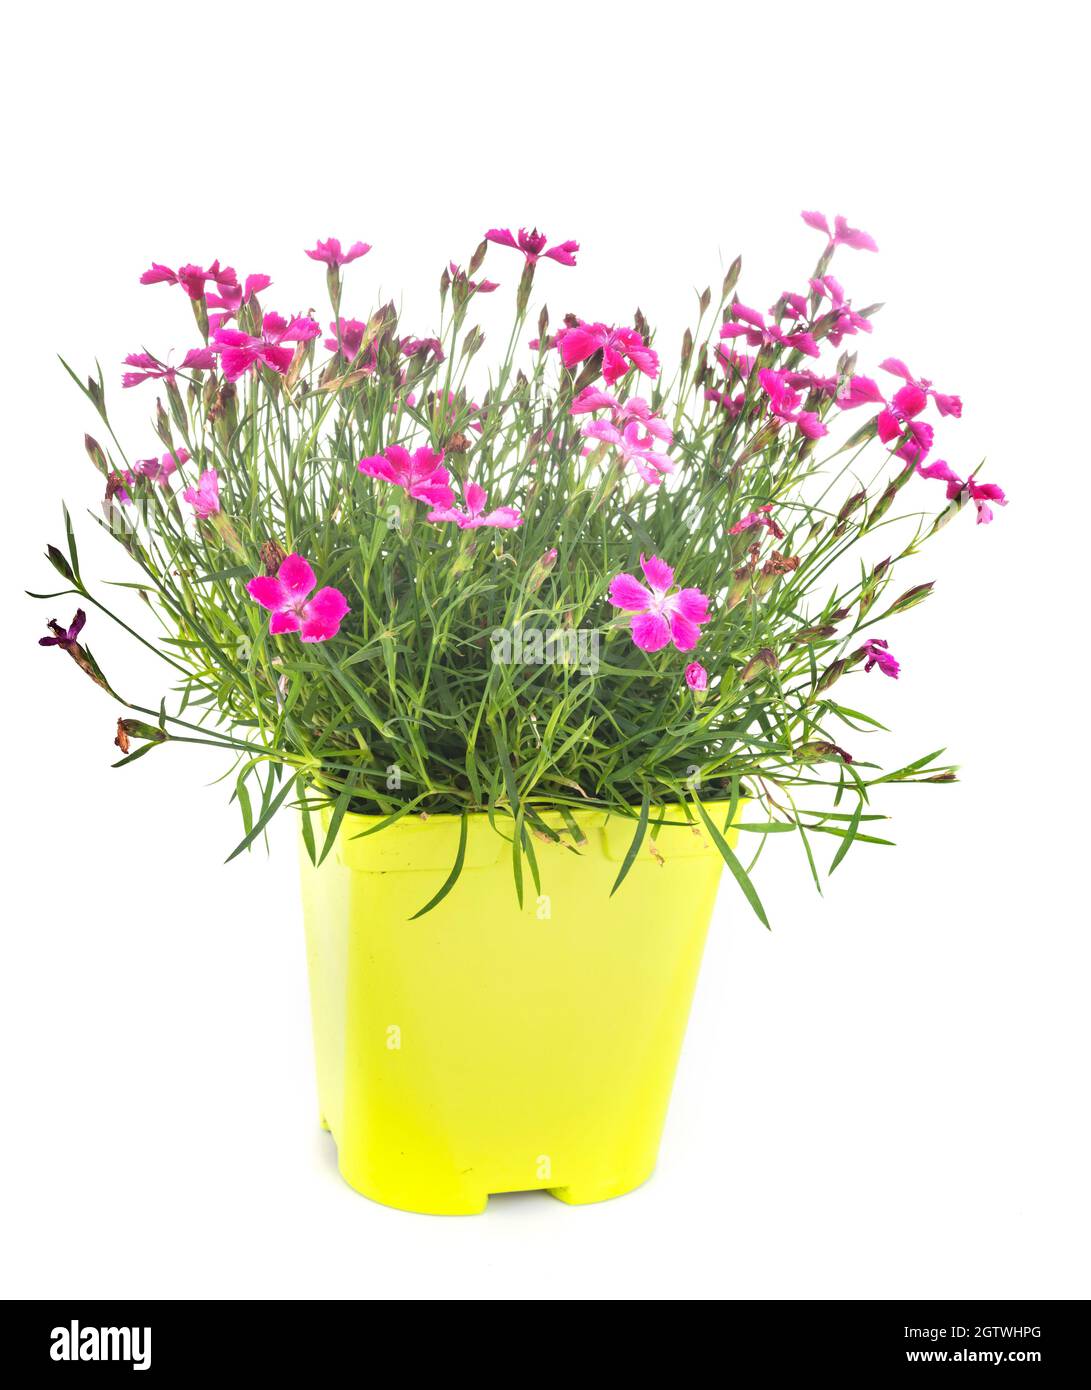 Potted Plant Against White Background Stock Photo